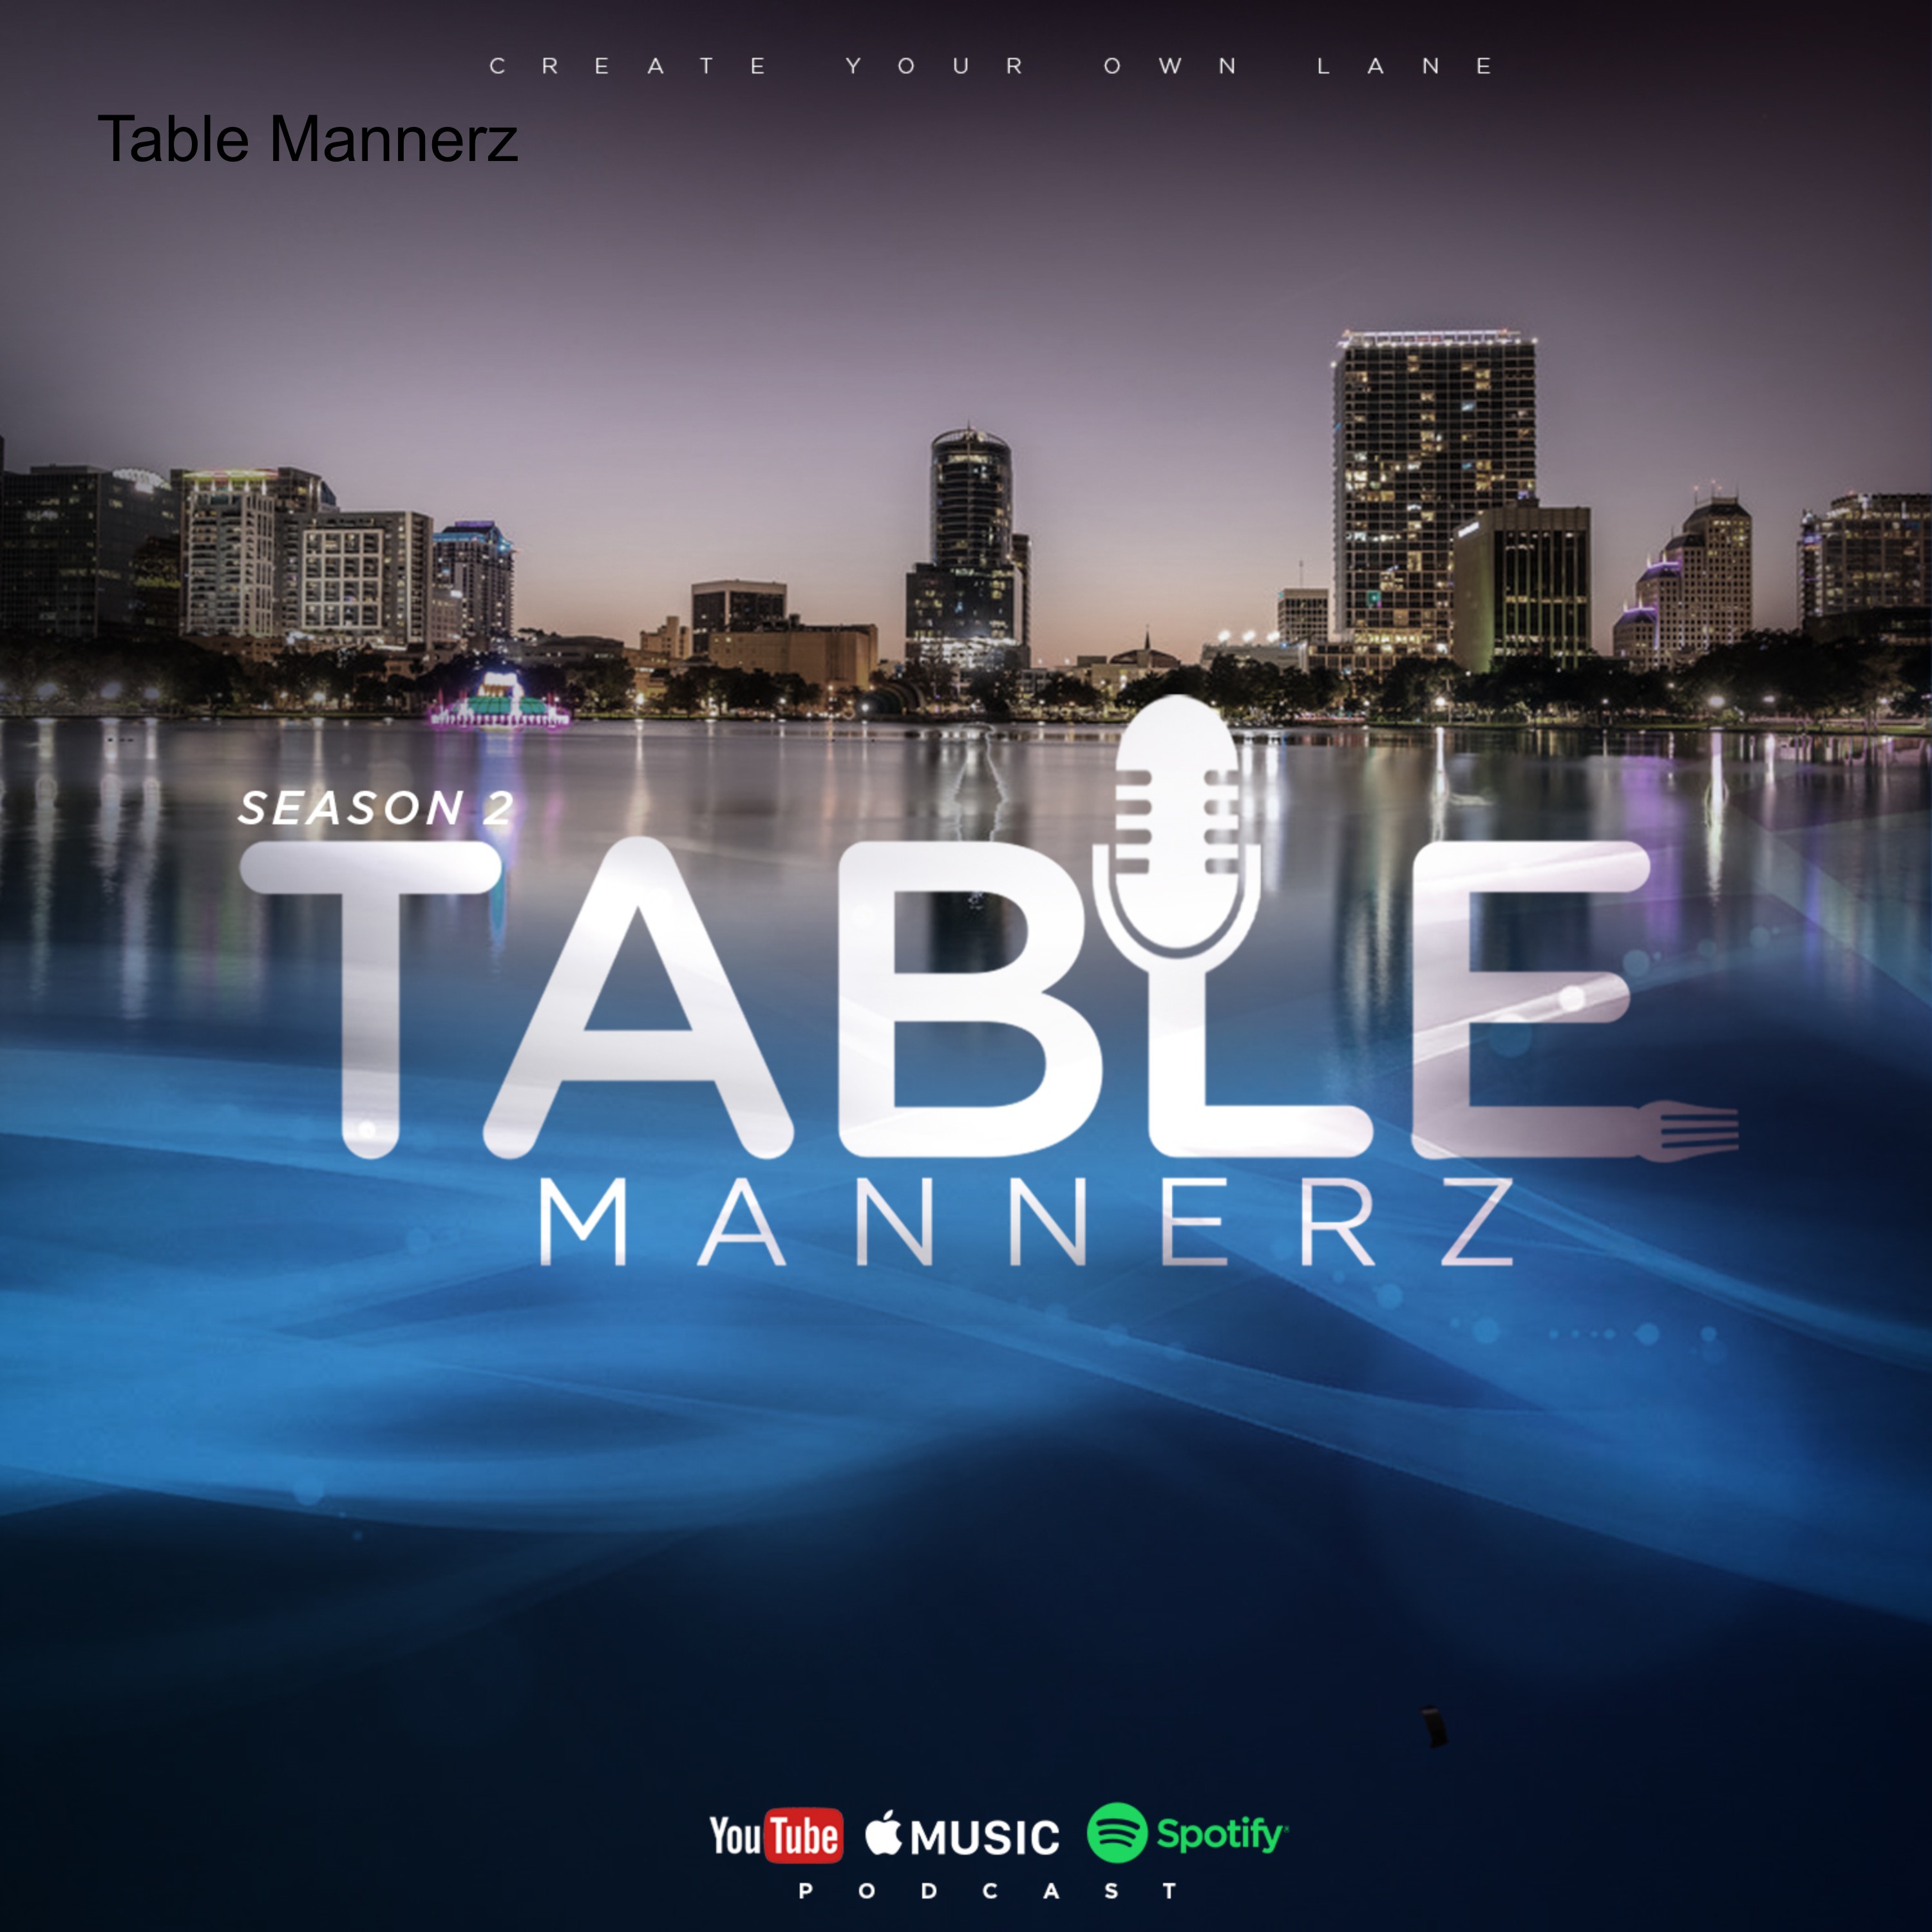 Table Mannerz